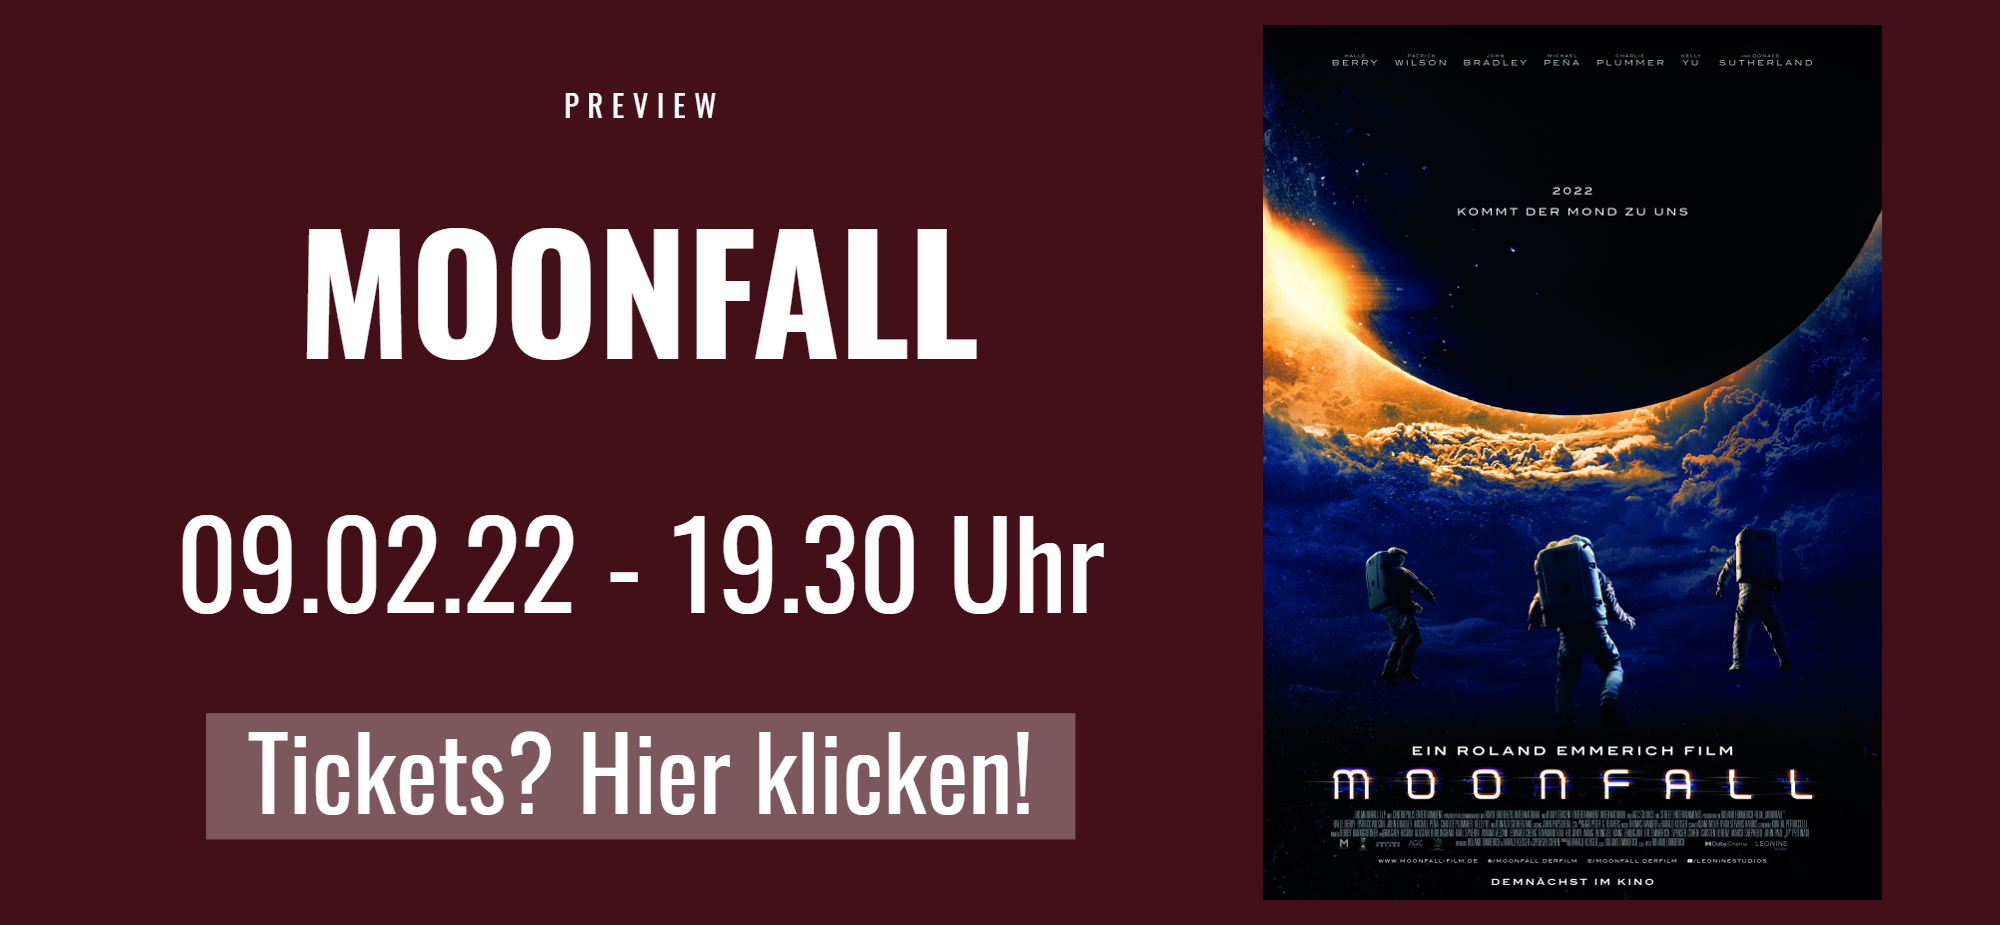 Preview - MOONFALL - 09.02.22